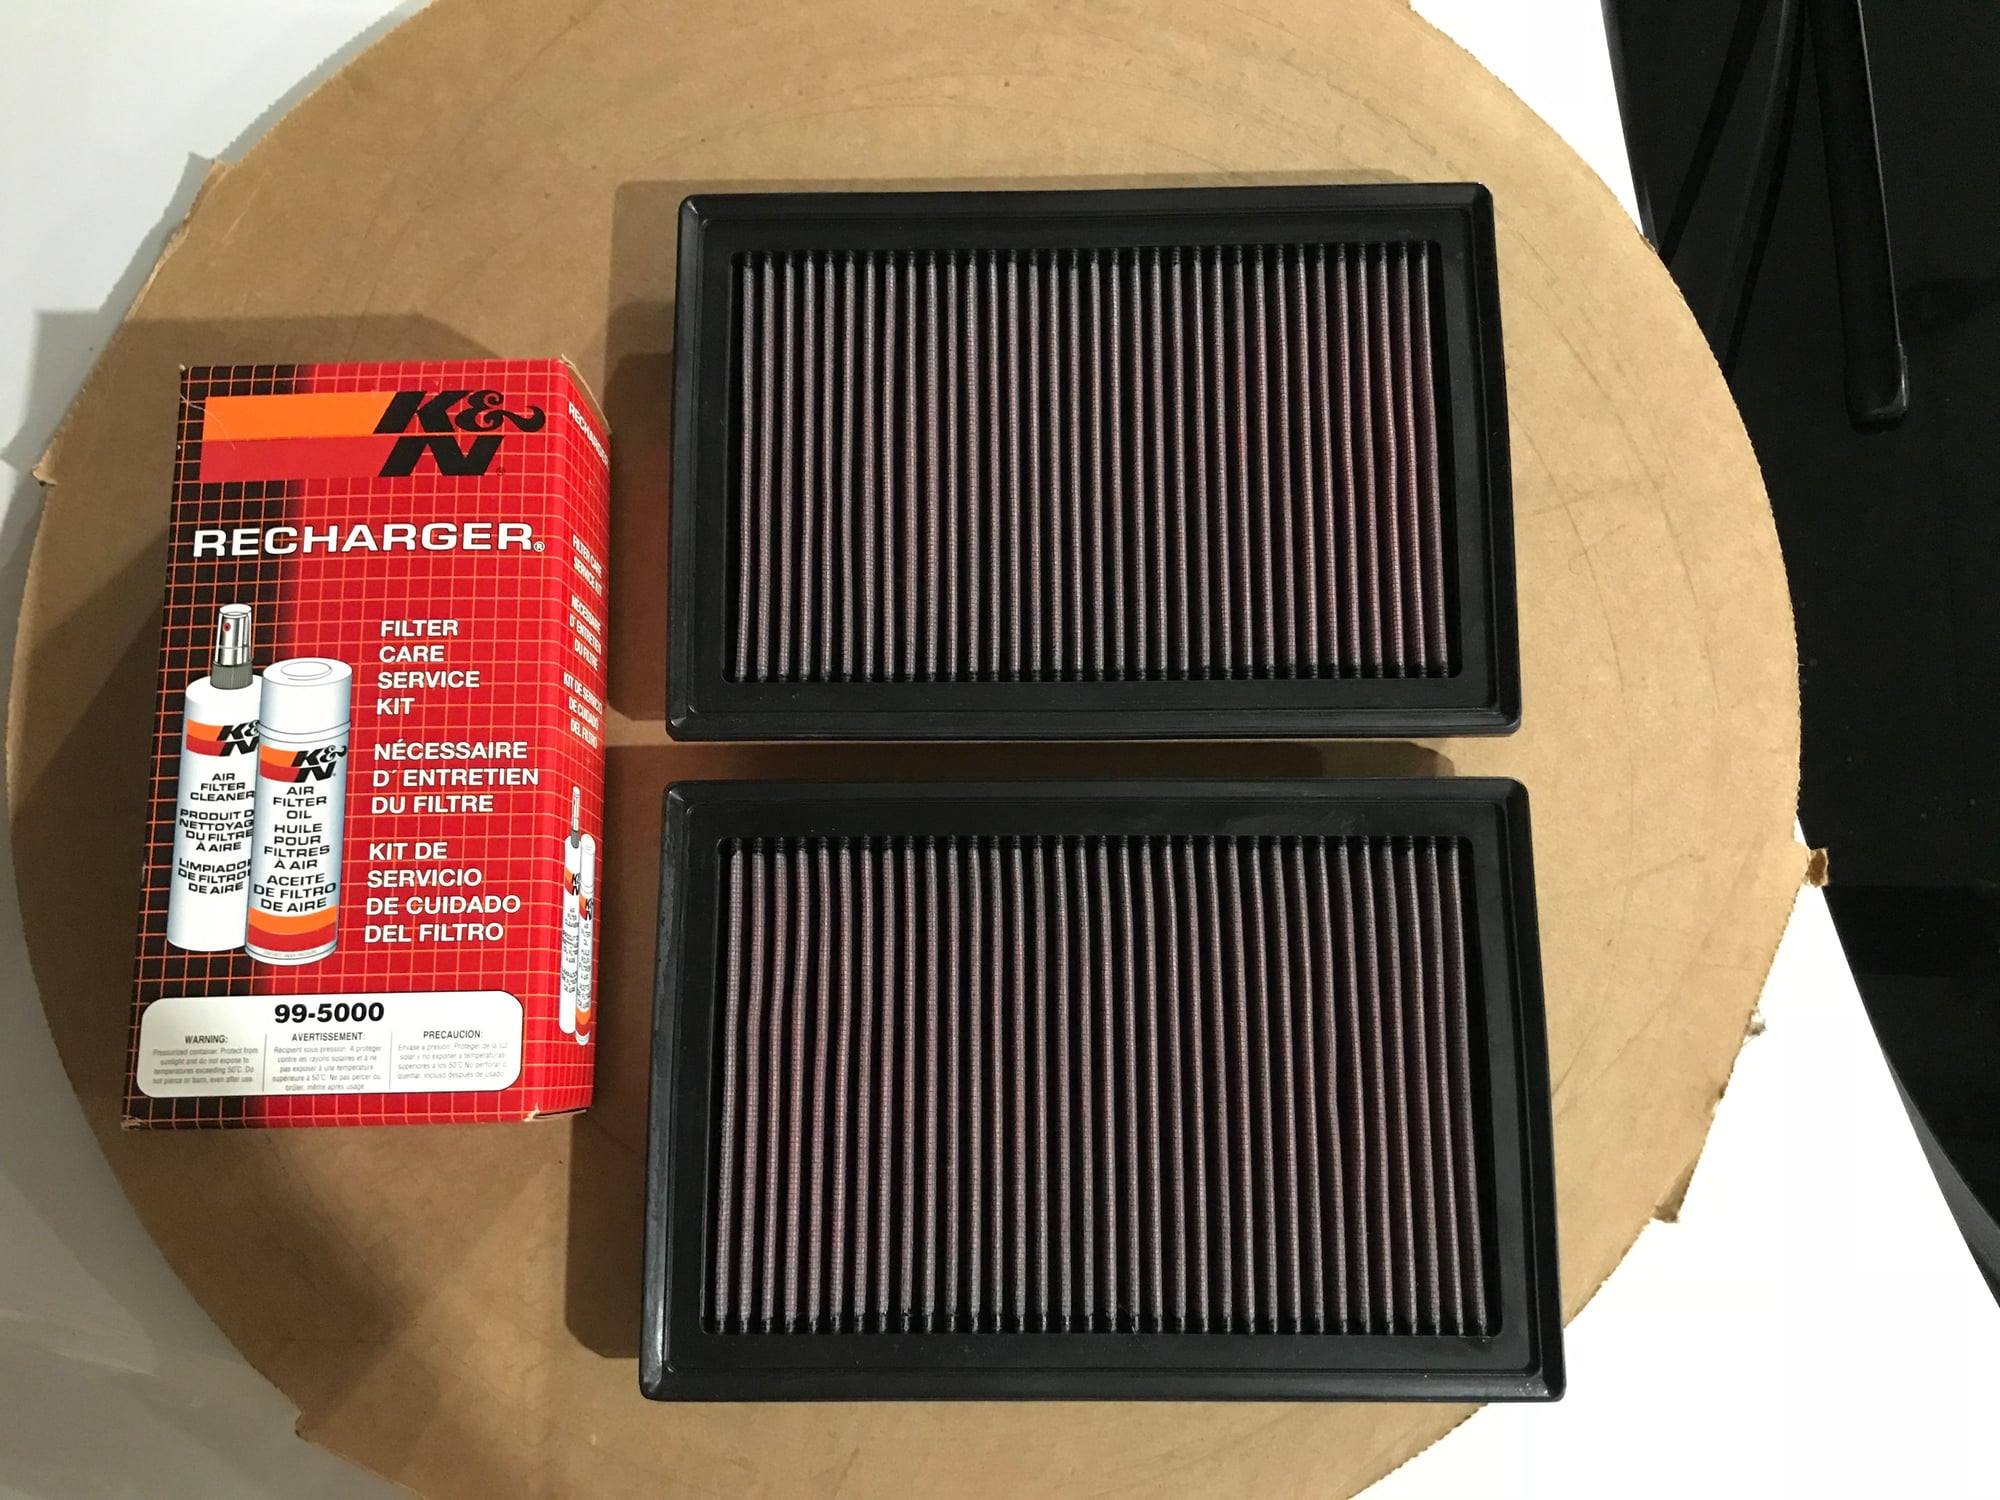 Engine - Intake/Fuel - (2) K&N 33-2381 air filters and filter care kit - Used - Mount Prospect, IL 60056, United States